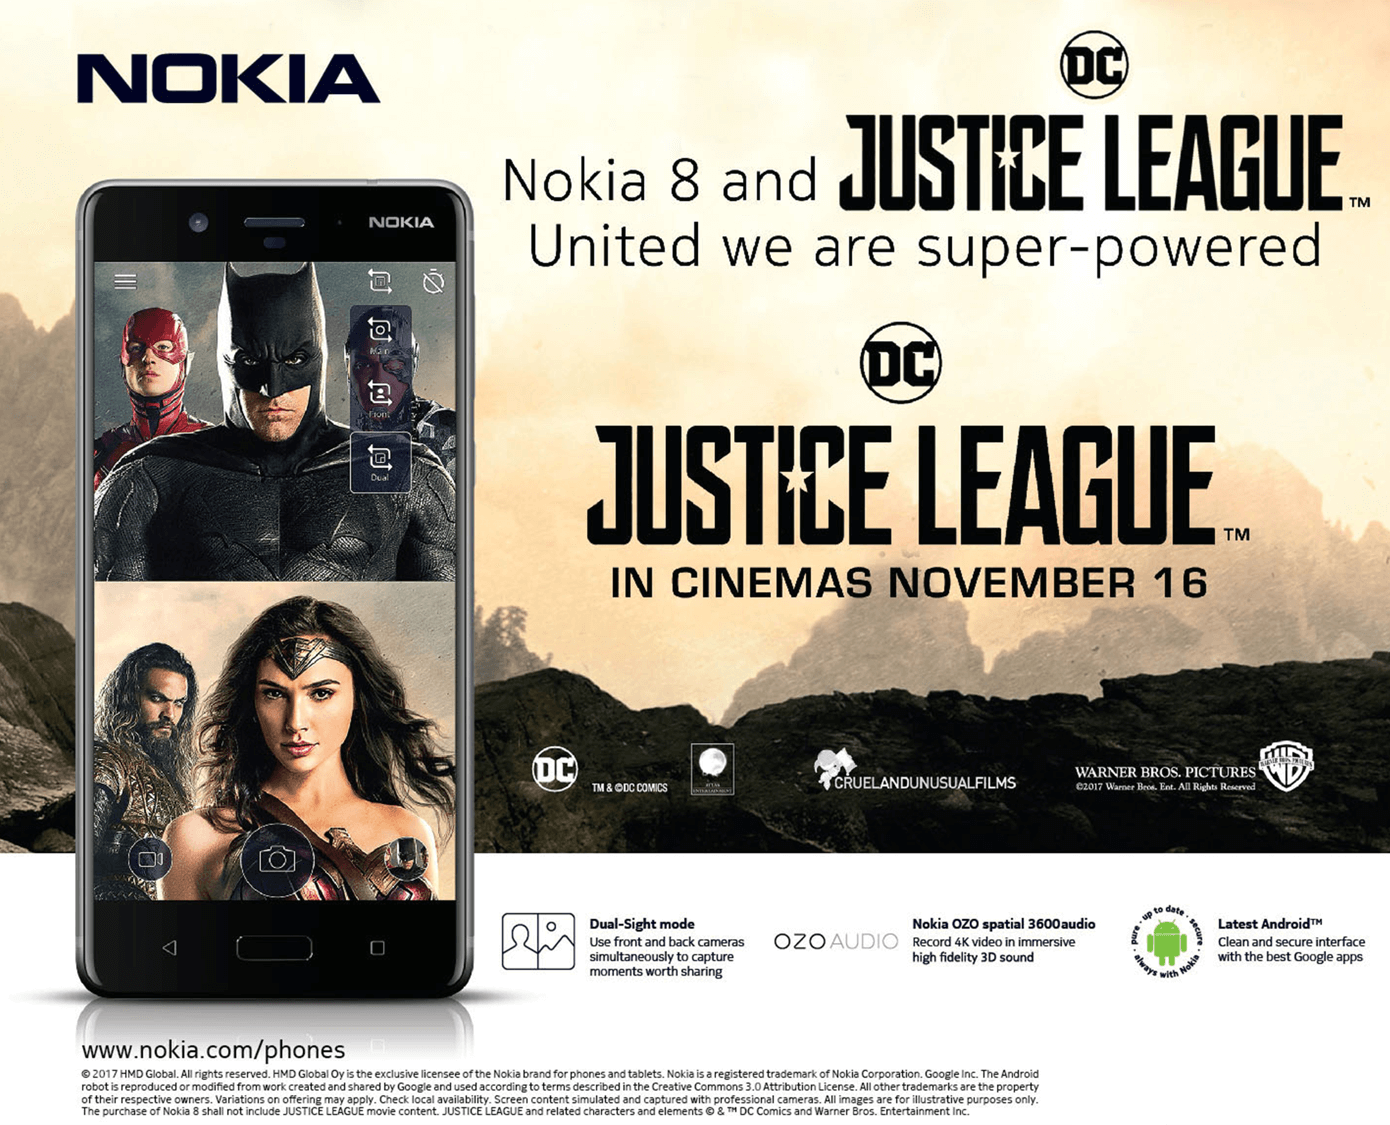 Get FREE Tickets to Watch Justice League When You Buy a Nokia Smartphone from MemoXpress!